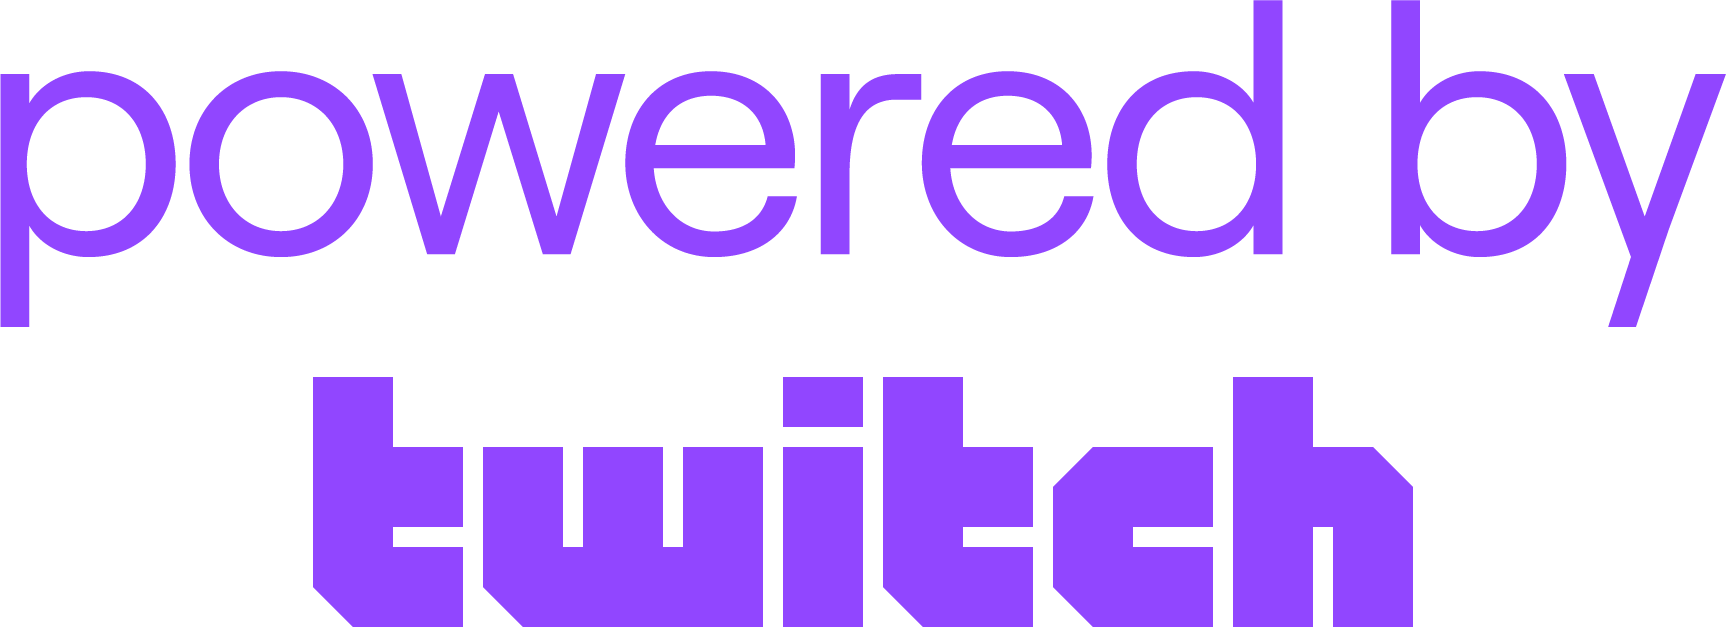 Powered by Twitch